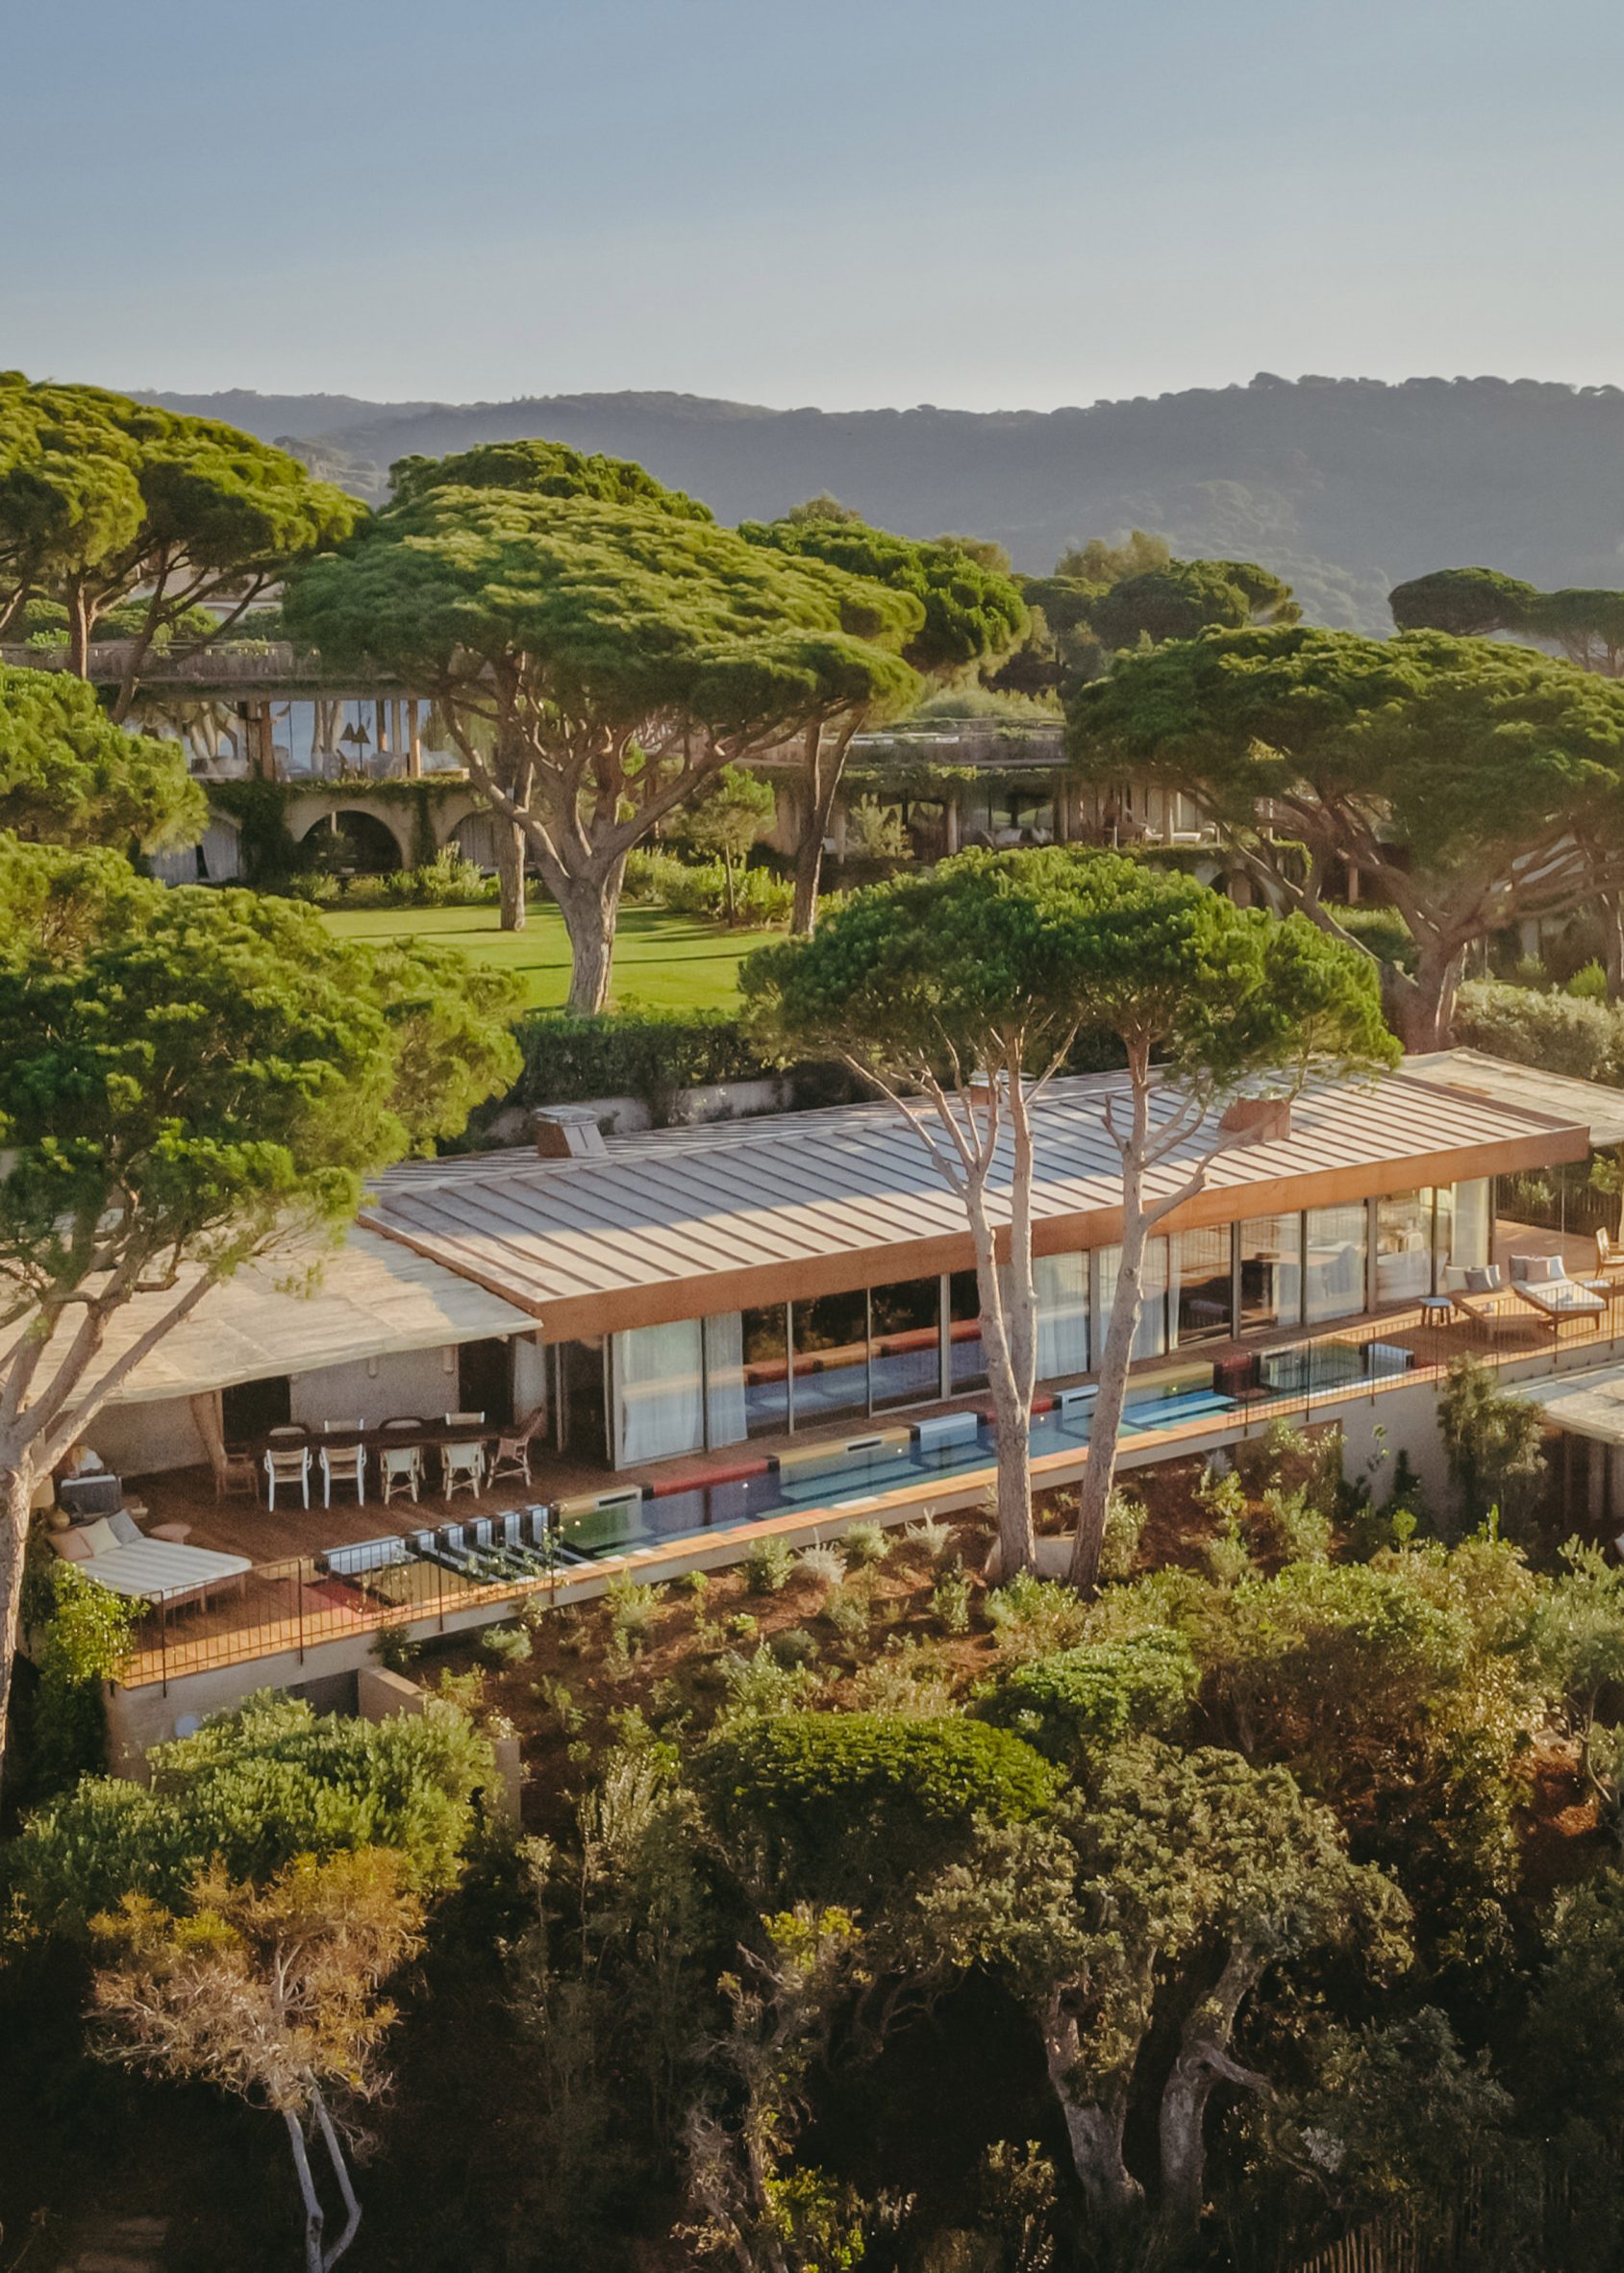 Where to stay in Saint Tropez [Comprehensive Guide for 2023]